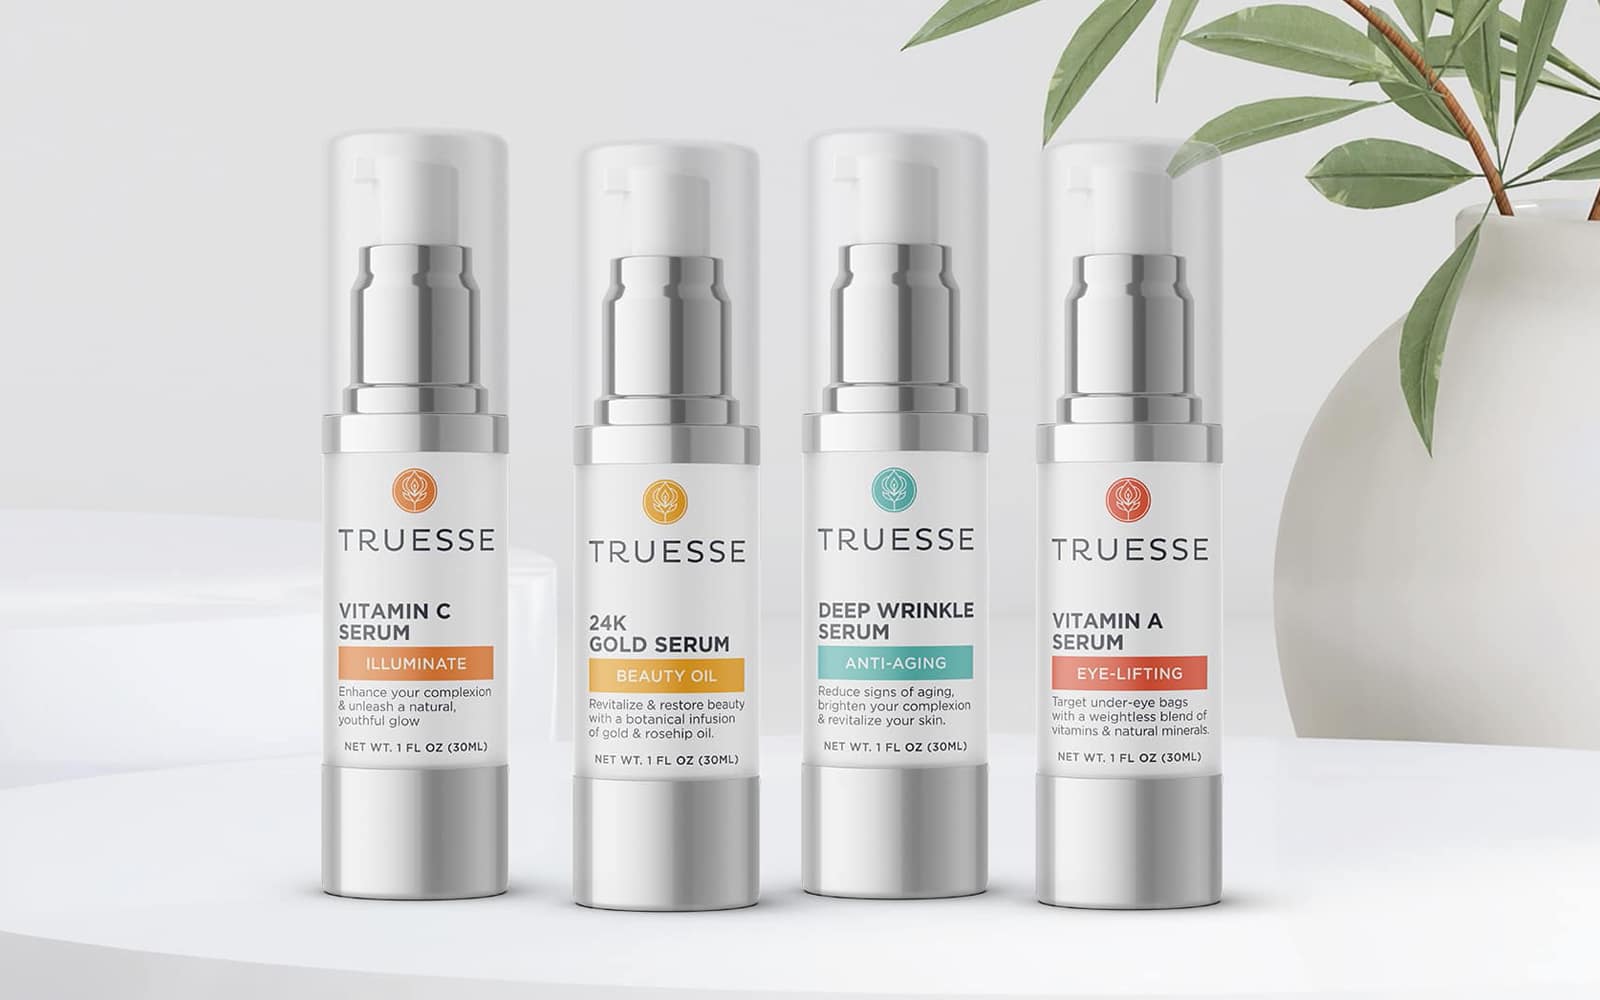 Product line of skincare serums with silver bottles, white label backgrounds, and pops of color signifying each product type